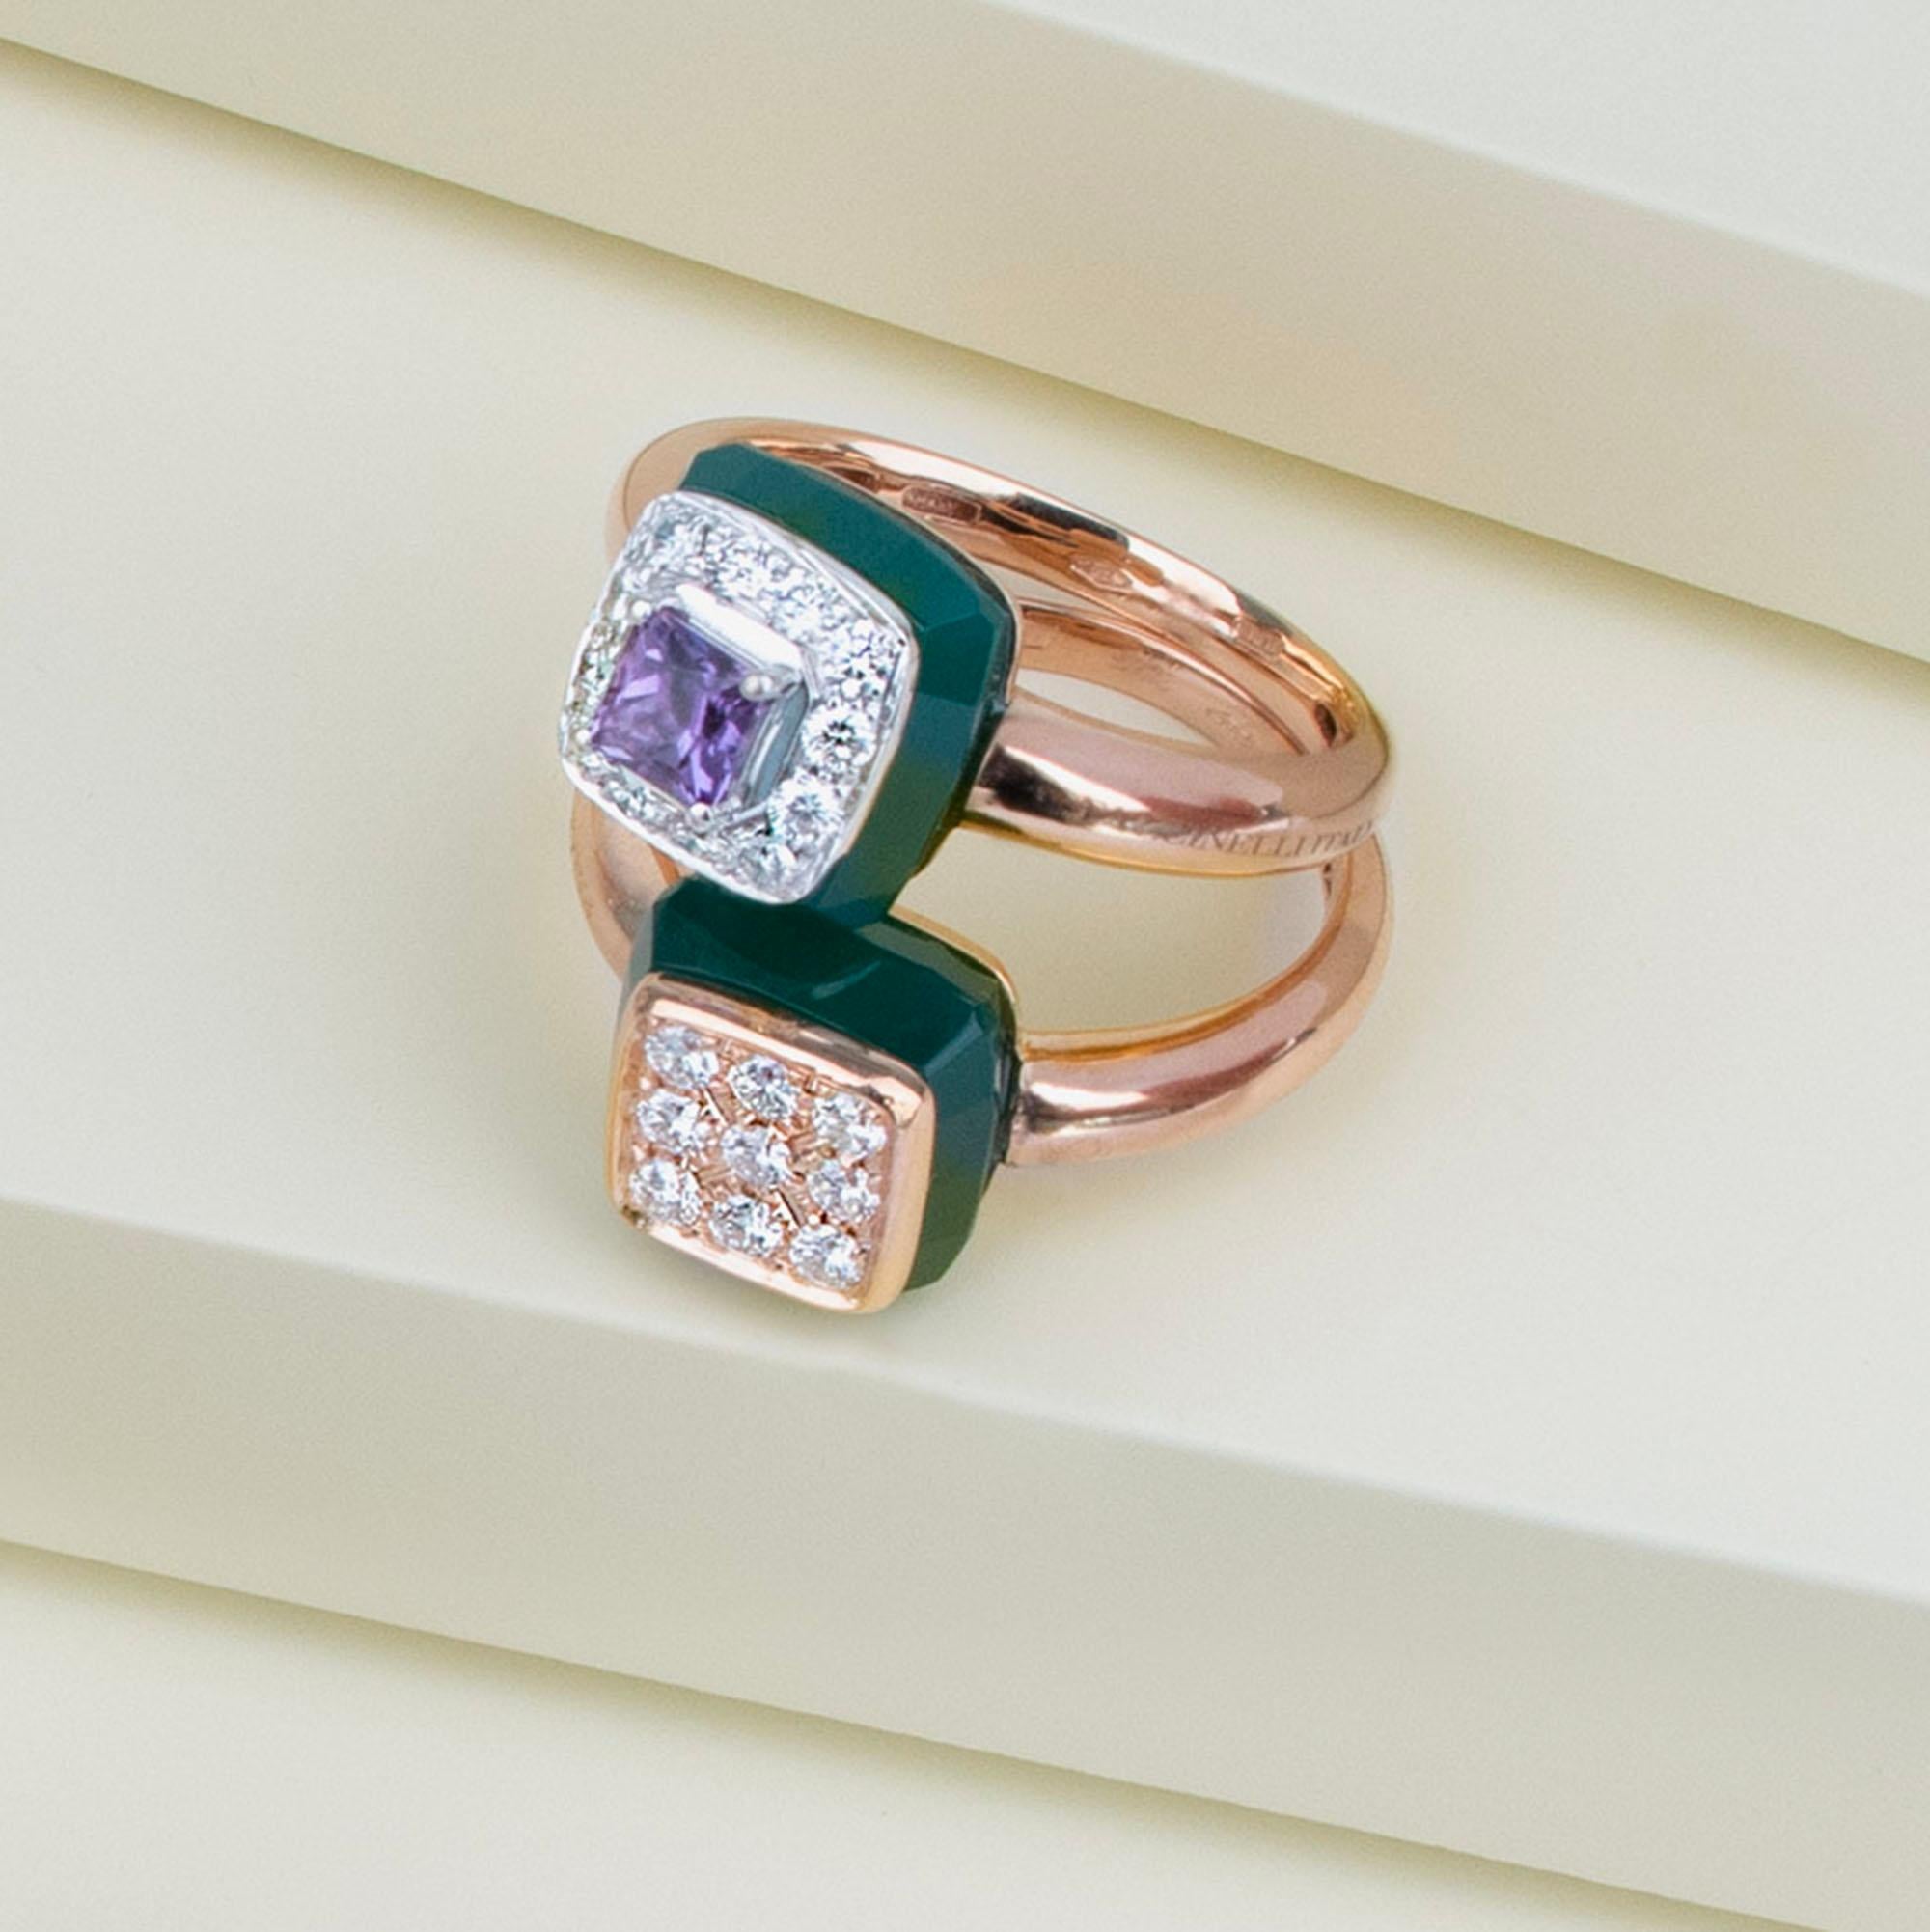 For Sale:  Les Petits Bonbons Ring Square with Amethyst, Green Onyx and Diamonds 3